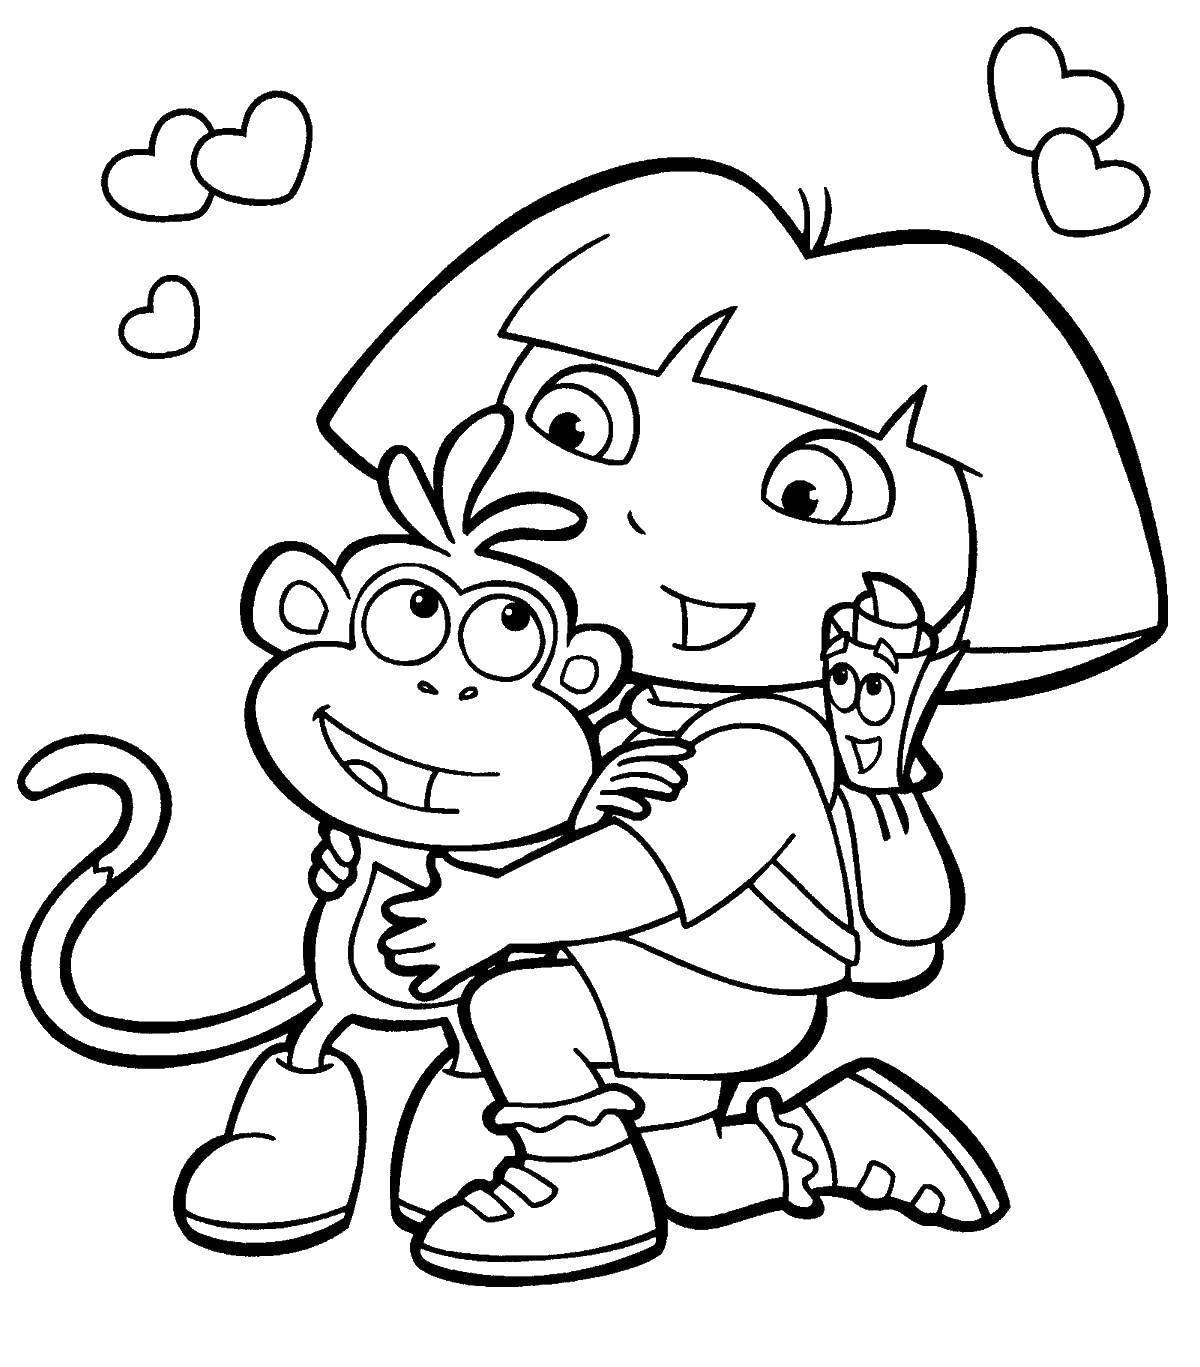 Coloring Friendly love. Category cartoons. Tags:  Cartoon character.